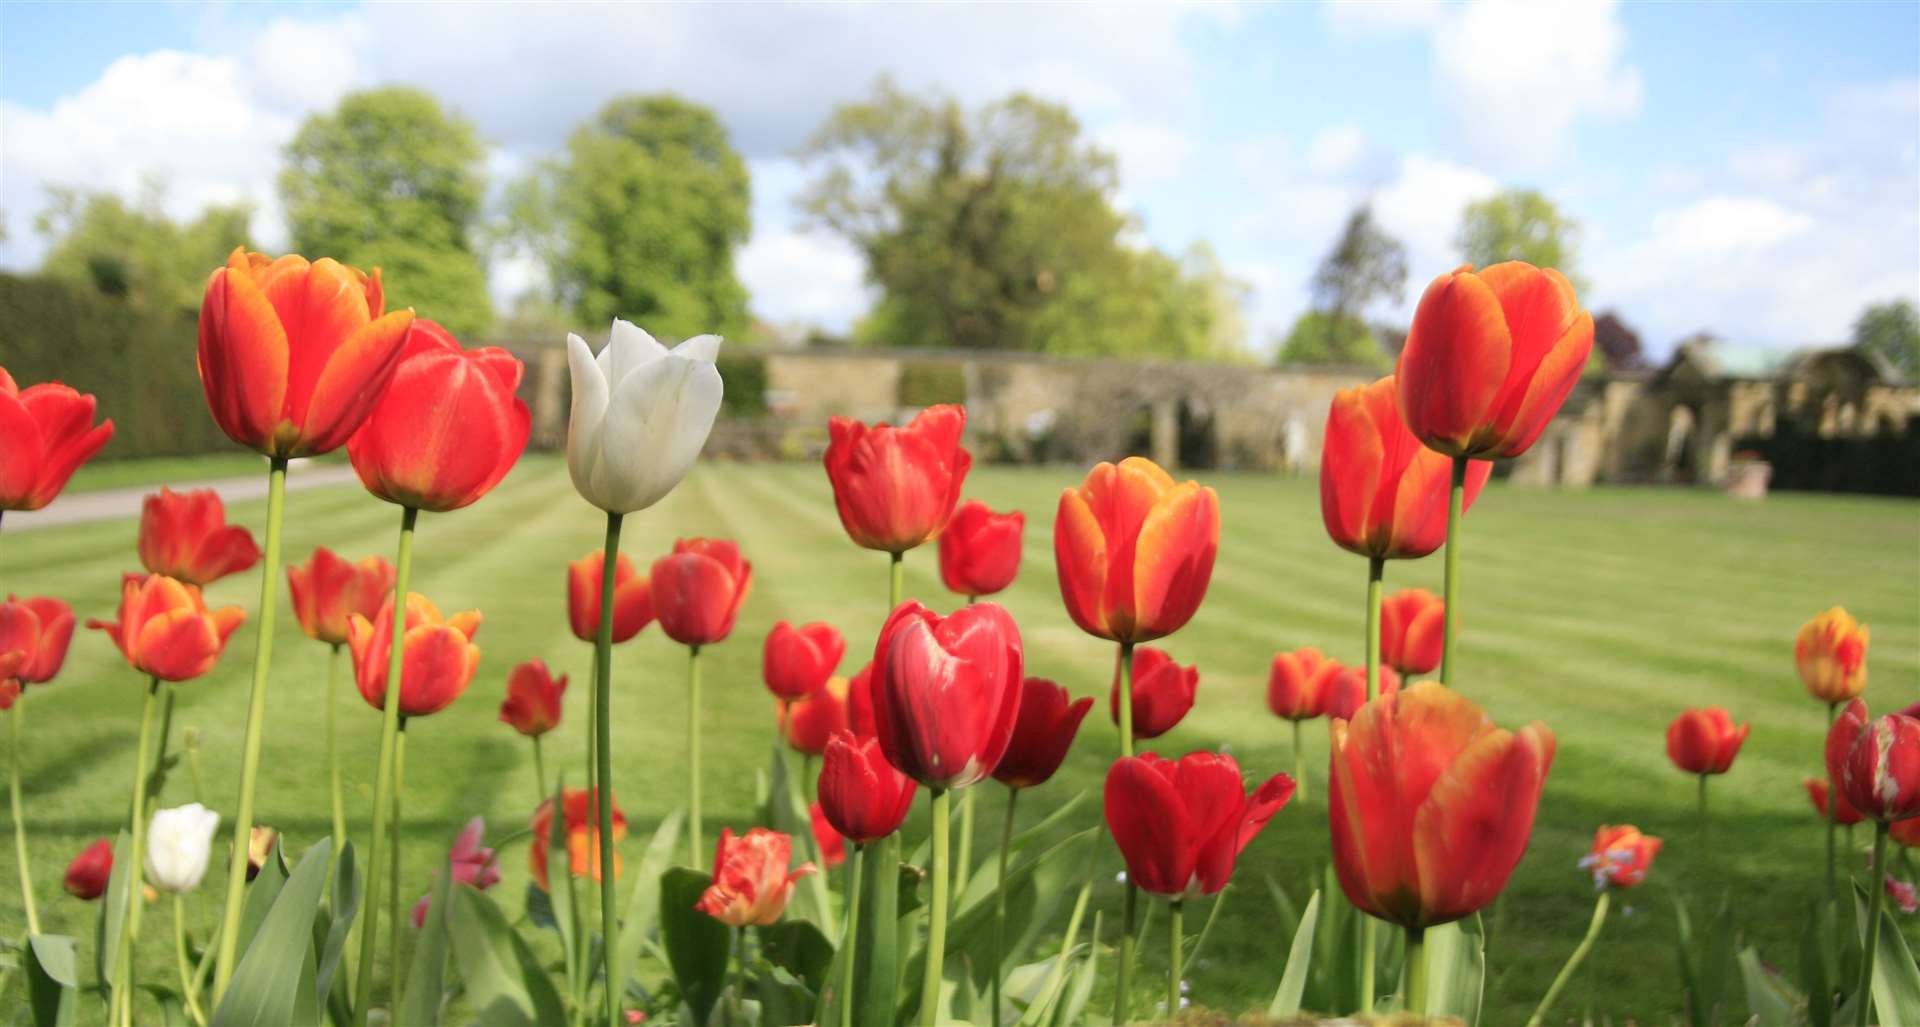 Tulips at Hever Castle Picture: Hever Castle & Gardens